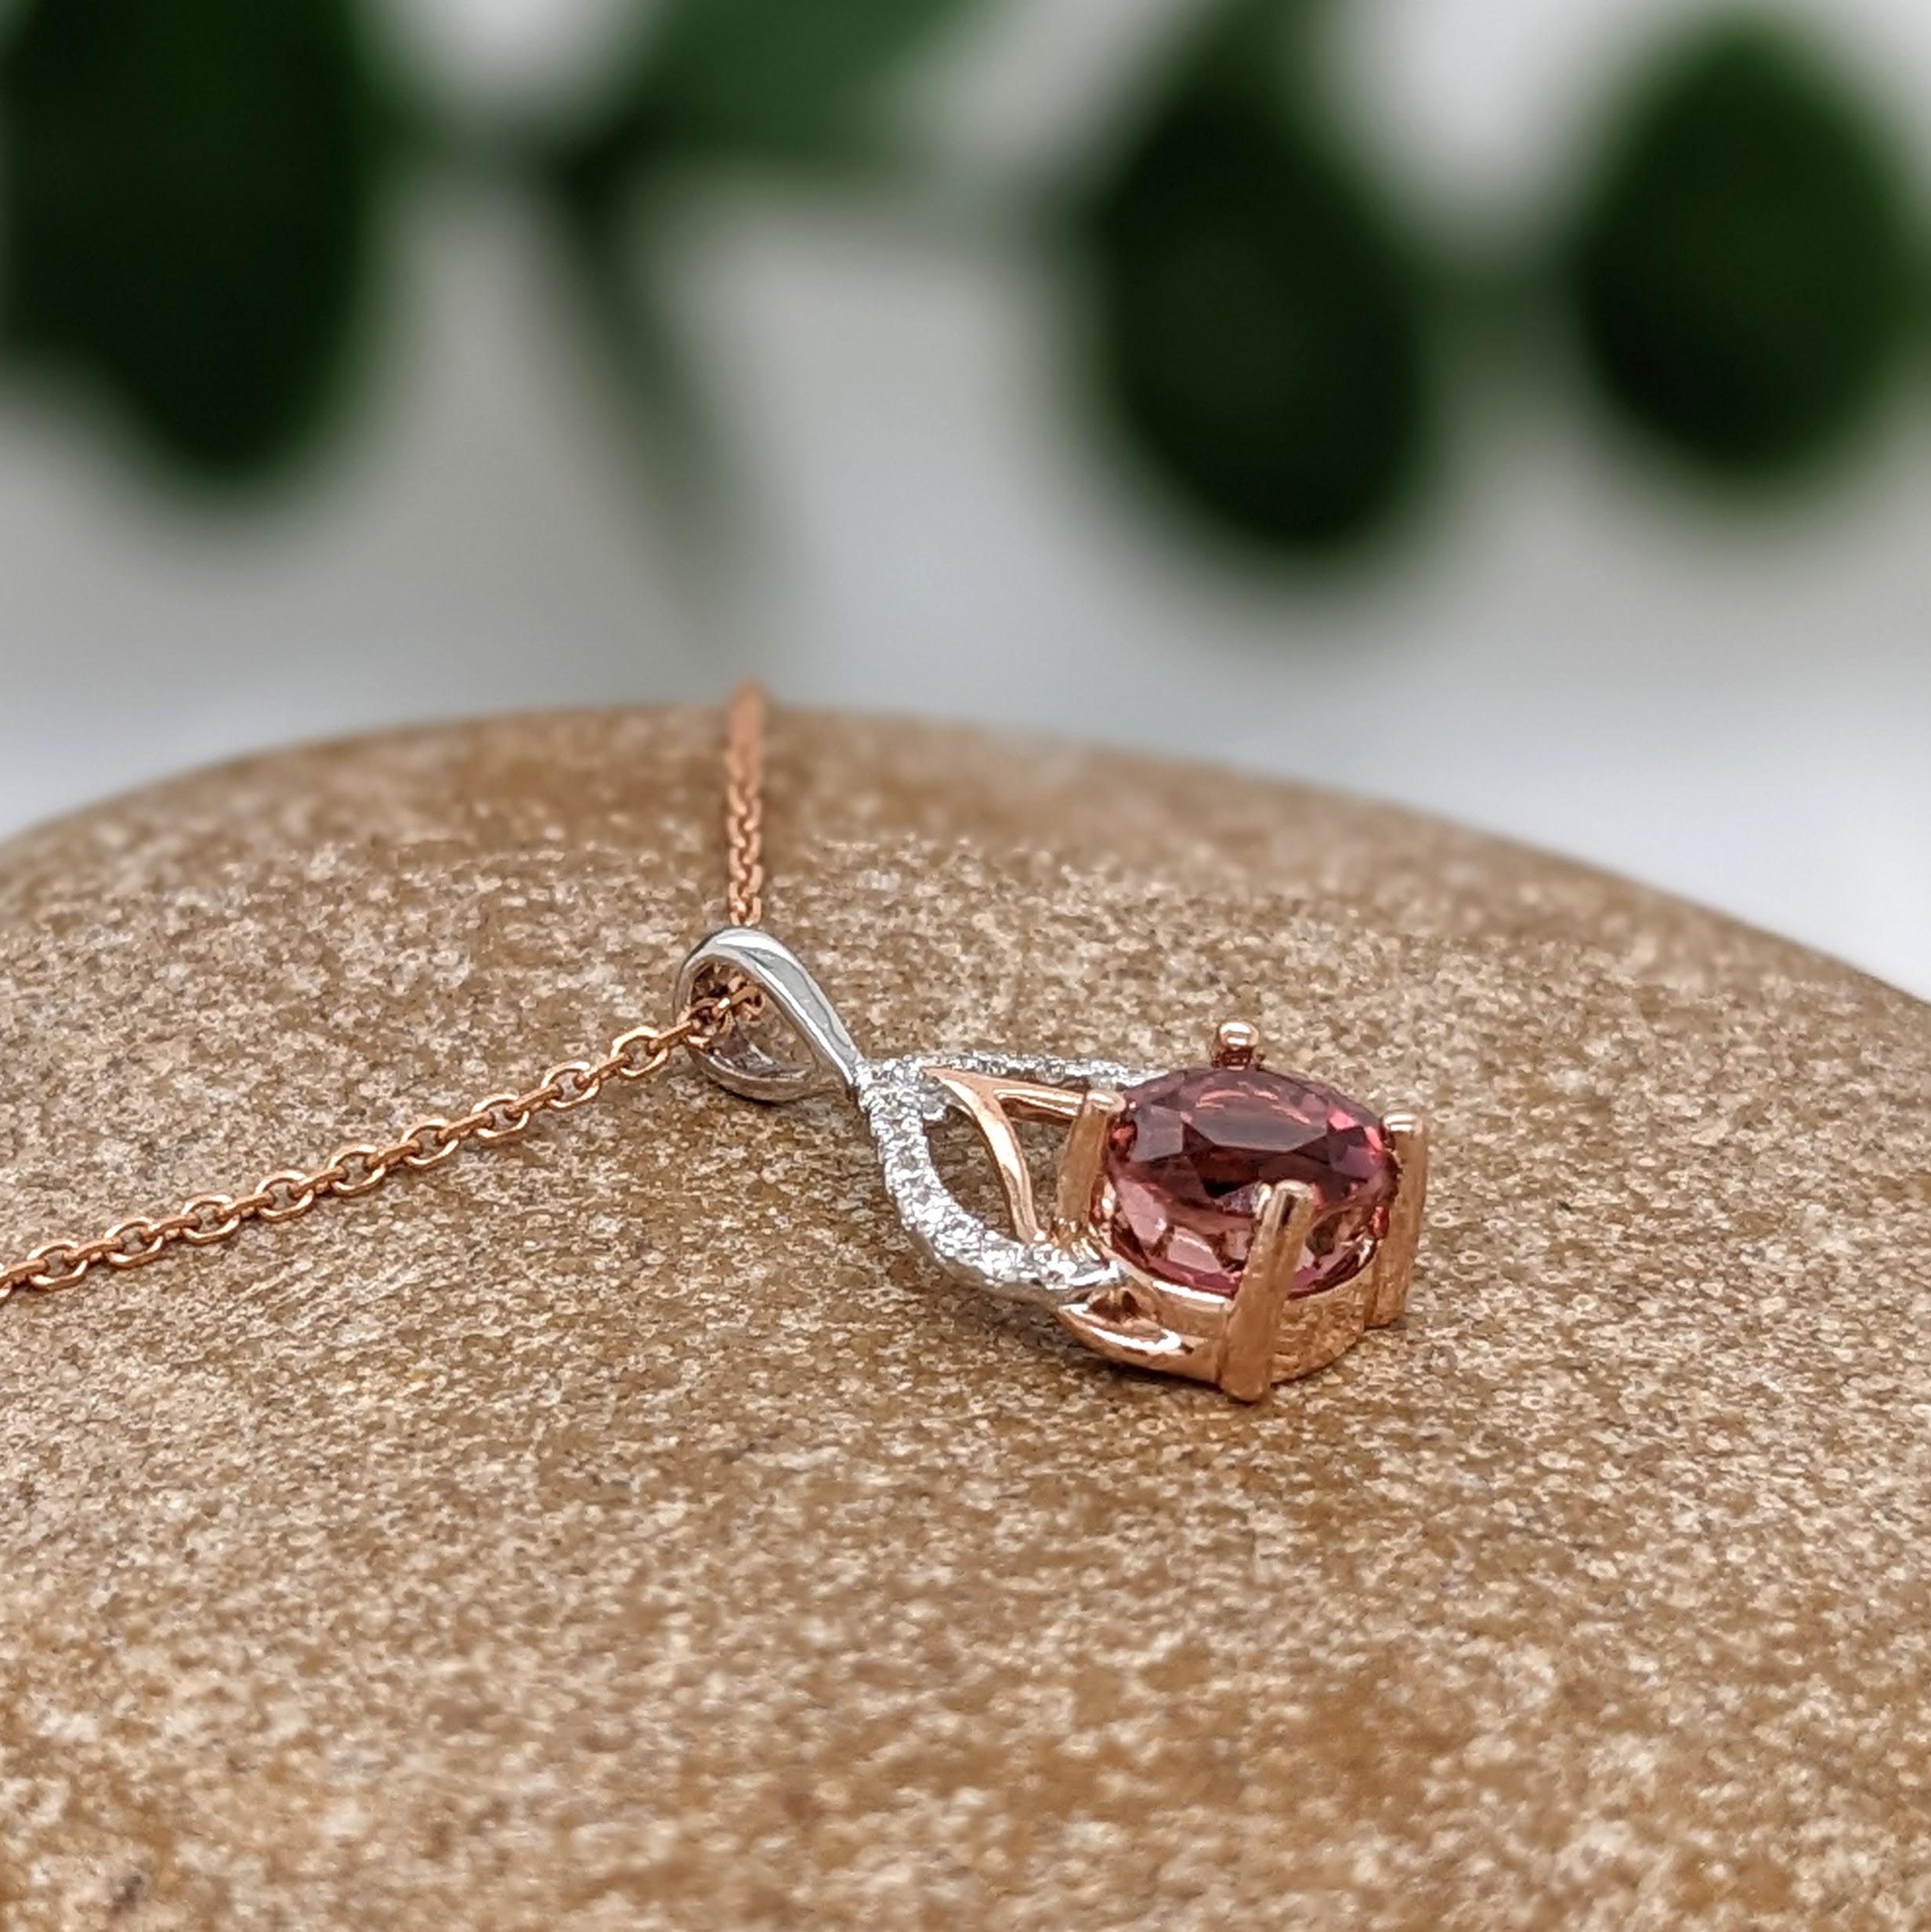 Pink Tourmaline Pendant w Natural Diamonds in Solid 14k Dual Tone Gold Round 5mm